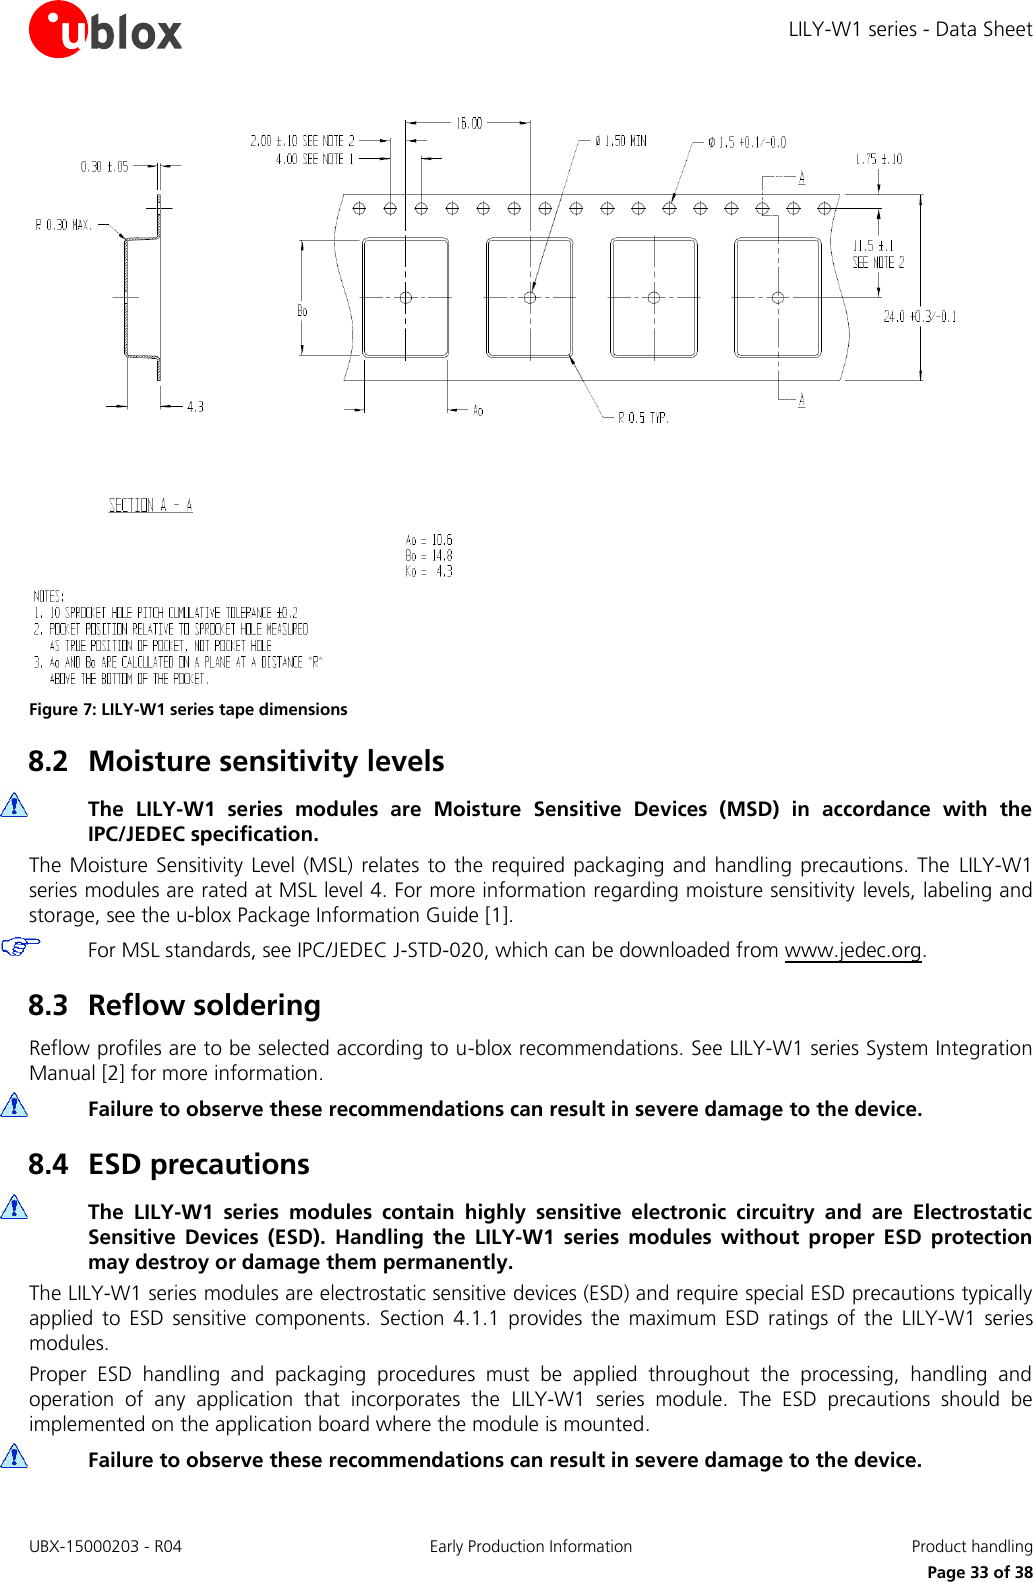 LILY-W1 series - Data Sheet UBX-15000203 - R04 Early Production Information  Product handling     Page 33 of 38  Figure 7: LILY-W1 series tape dimensions 8.2 Moisture sensitivity levels  The  LILY-W1  series  modules  are  Moisture  Sensitive  Devices  (MSD)  in  accordance  with  the IPC/JEDEC specification. The  Moisture  Sensitivity  Level (MSL)  relates to the  required  packaging and  handling precautions.  The  LILY-W1 series modules are rated at MSL level 4. For more information regarding moisture sensitivity levels, labeling and storage, see the u-blox Package Information Guide [1].  For MSL standards, see IPC/JEDEC J-STD-020, which can be downloaded from www.jedec.org. 8.3 Reflow soldering Reflow profiles are to be selected according to u-blox recommendations. See LILY-W1 series System Integration Manual [2] for more information.  Failure to observe these recommendations can result in severe damage to the device. 8.4 ESD precautions  The  LILY-W1  series  modules  contain  highly  sensitive  electronic  circuitry  and  are  Electrostatic Sensitive  Devices  (ESD).  Handling  the  LILY-W1  series  modules  without  proper  ESD  protection may destroy or damage them permanently. The LILY-W1 series modules are electrostatic sensitive devices (ESD) and require special ESD precautions typically applied  to  ESD  sensitive  components.  Section  4.1.1  provides  the  maximum  ESD  ratings  of  the  LILY-W1  series modules.  Proper  ESD  handling  and  packaging  procedures  must  be  applied  throughout  the  processing,  handling  and operation  of  any  application  that  incorporates  the  LILY-W1  series  module.  The  ESD  precautions  should  be implemented on the application board where the module is mounted.  Failure to observe these recommendations can result in severe damage to the device. 